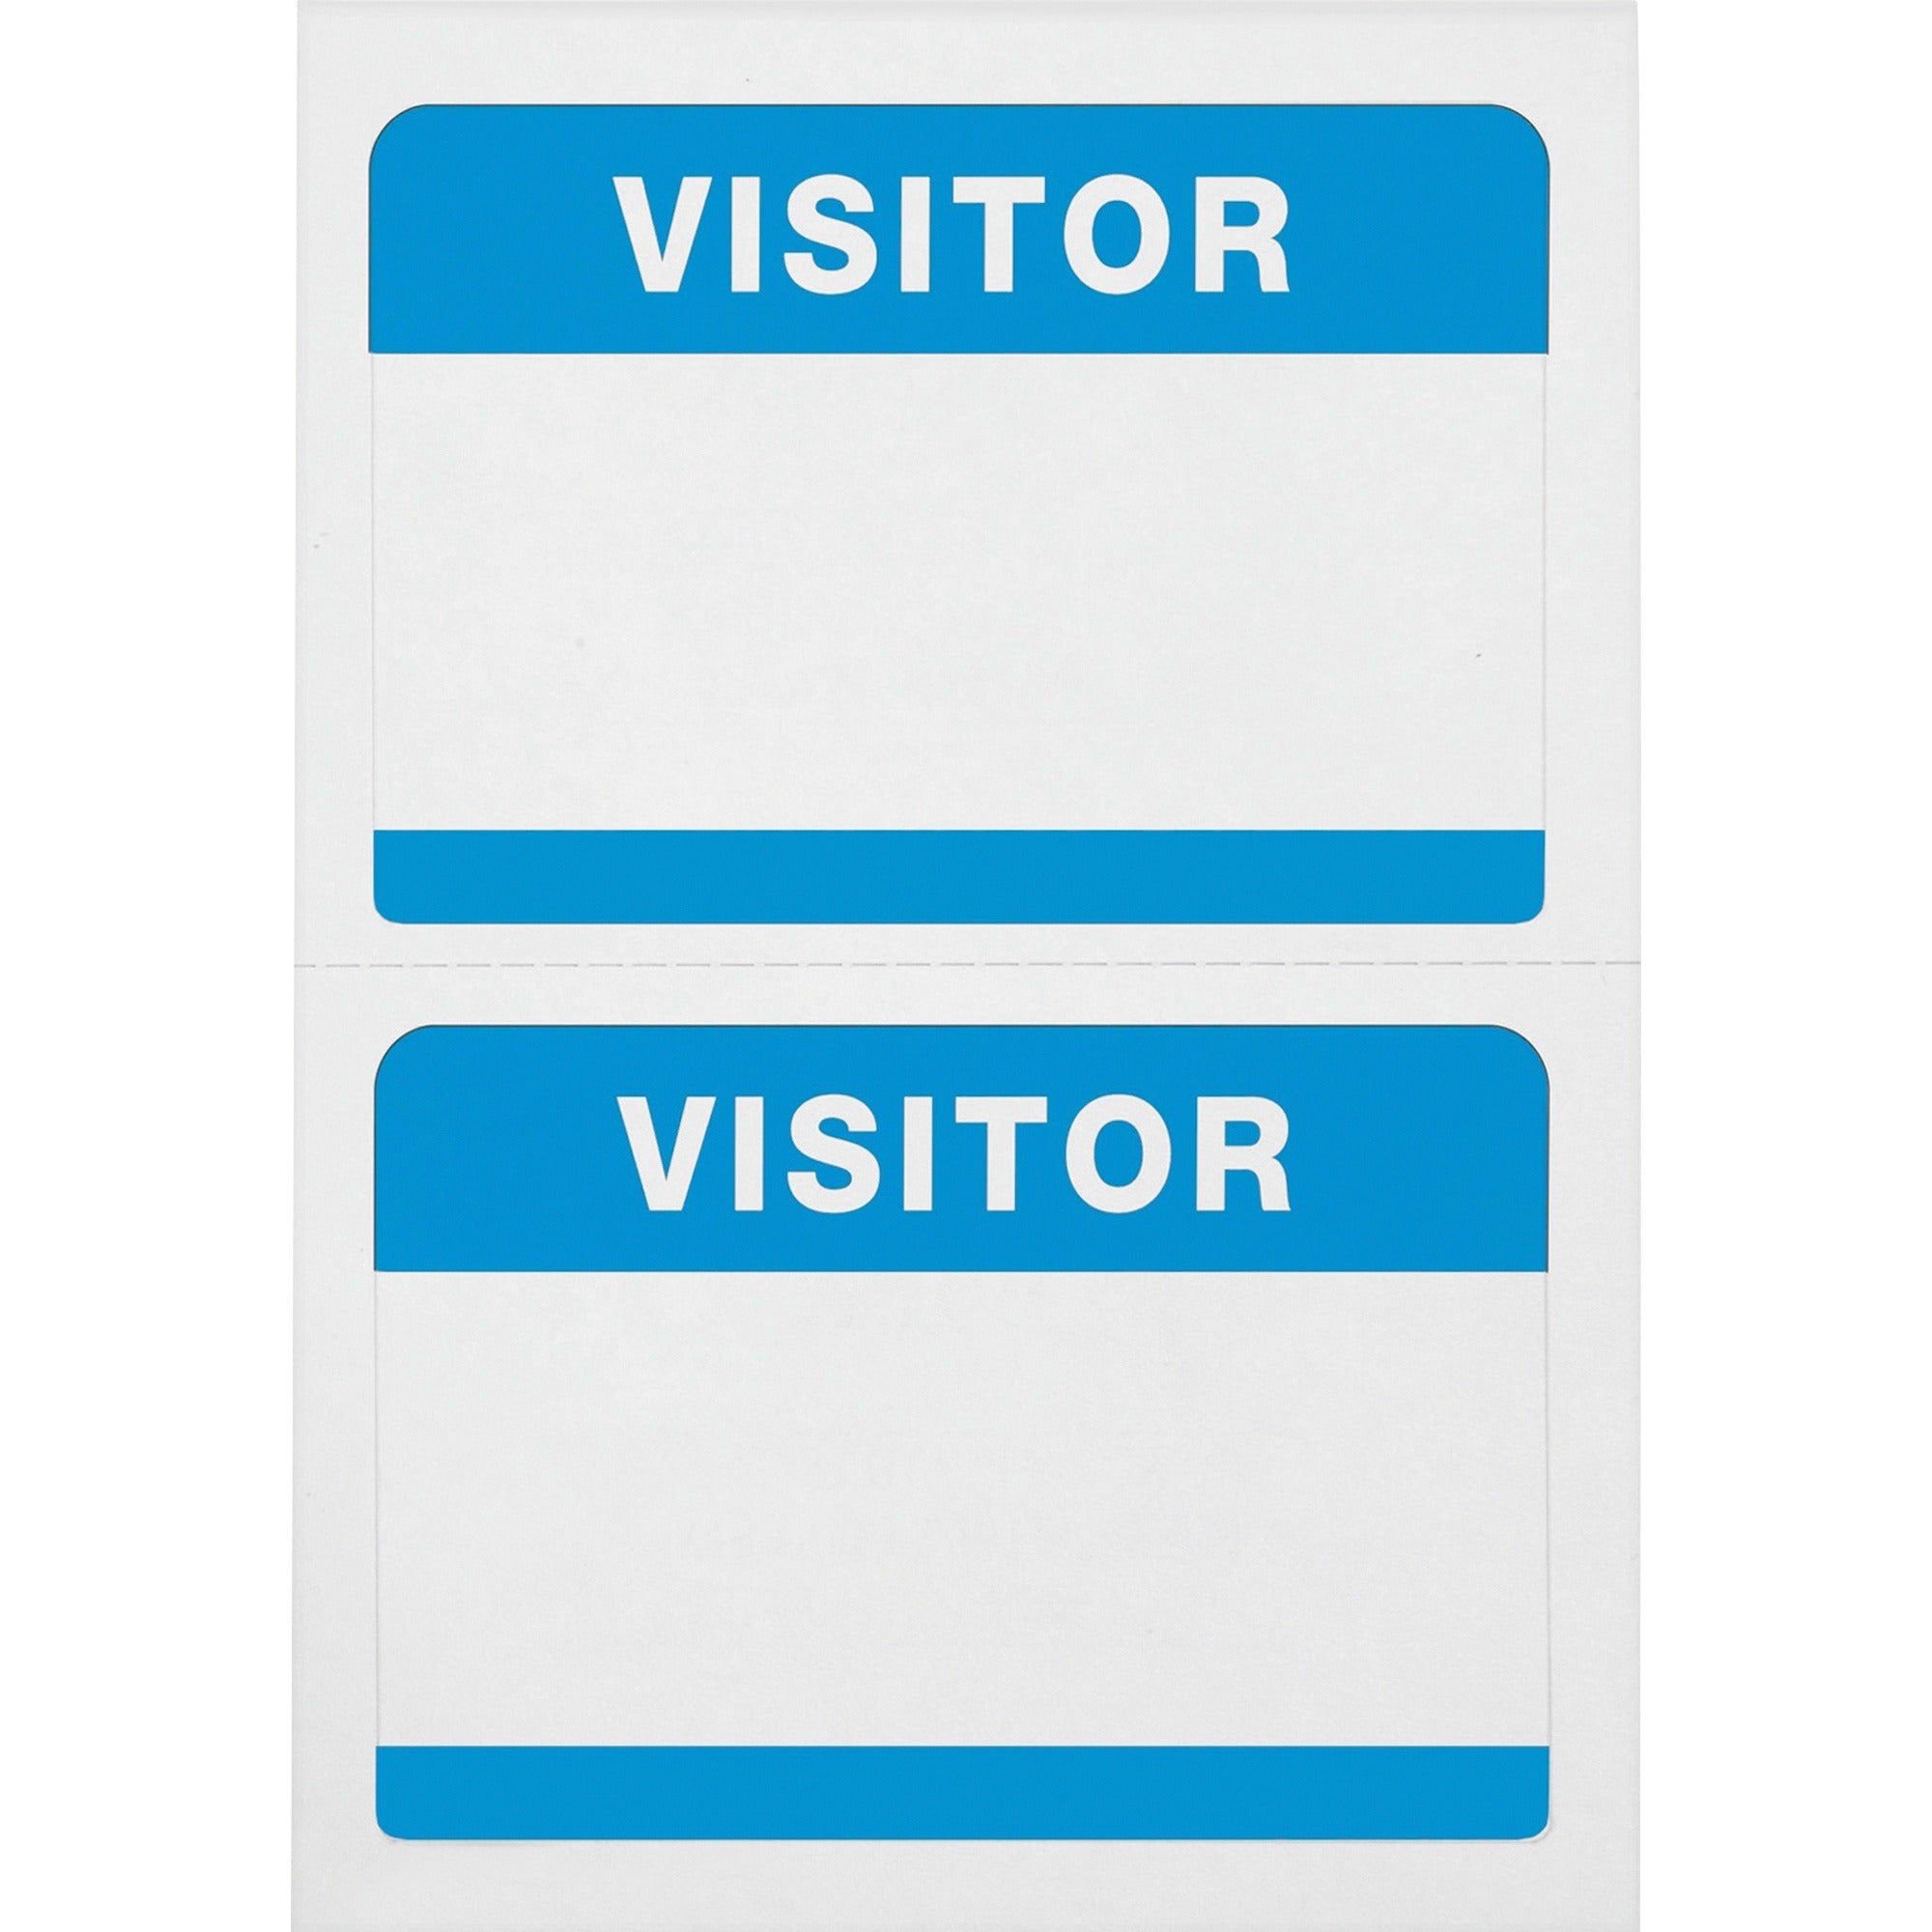 advantus-self-adhesive-visitor-badges-visitor-2-1-4-height-x-3-1-2-width-removable-adhesive-rectangle-white-blue-100-box_avt97190 - 1